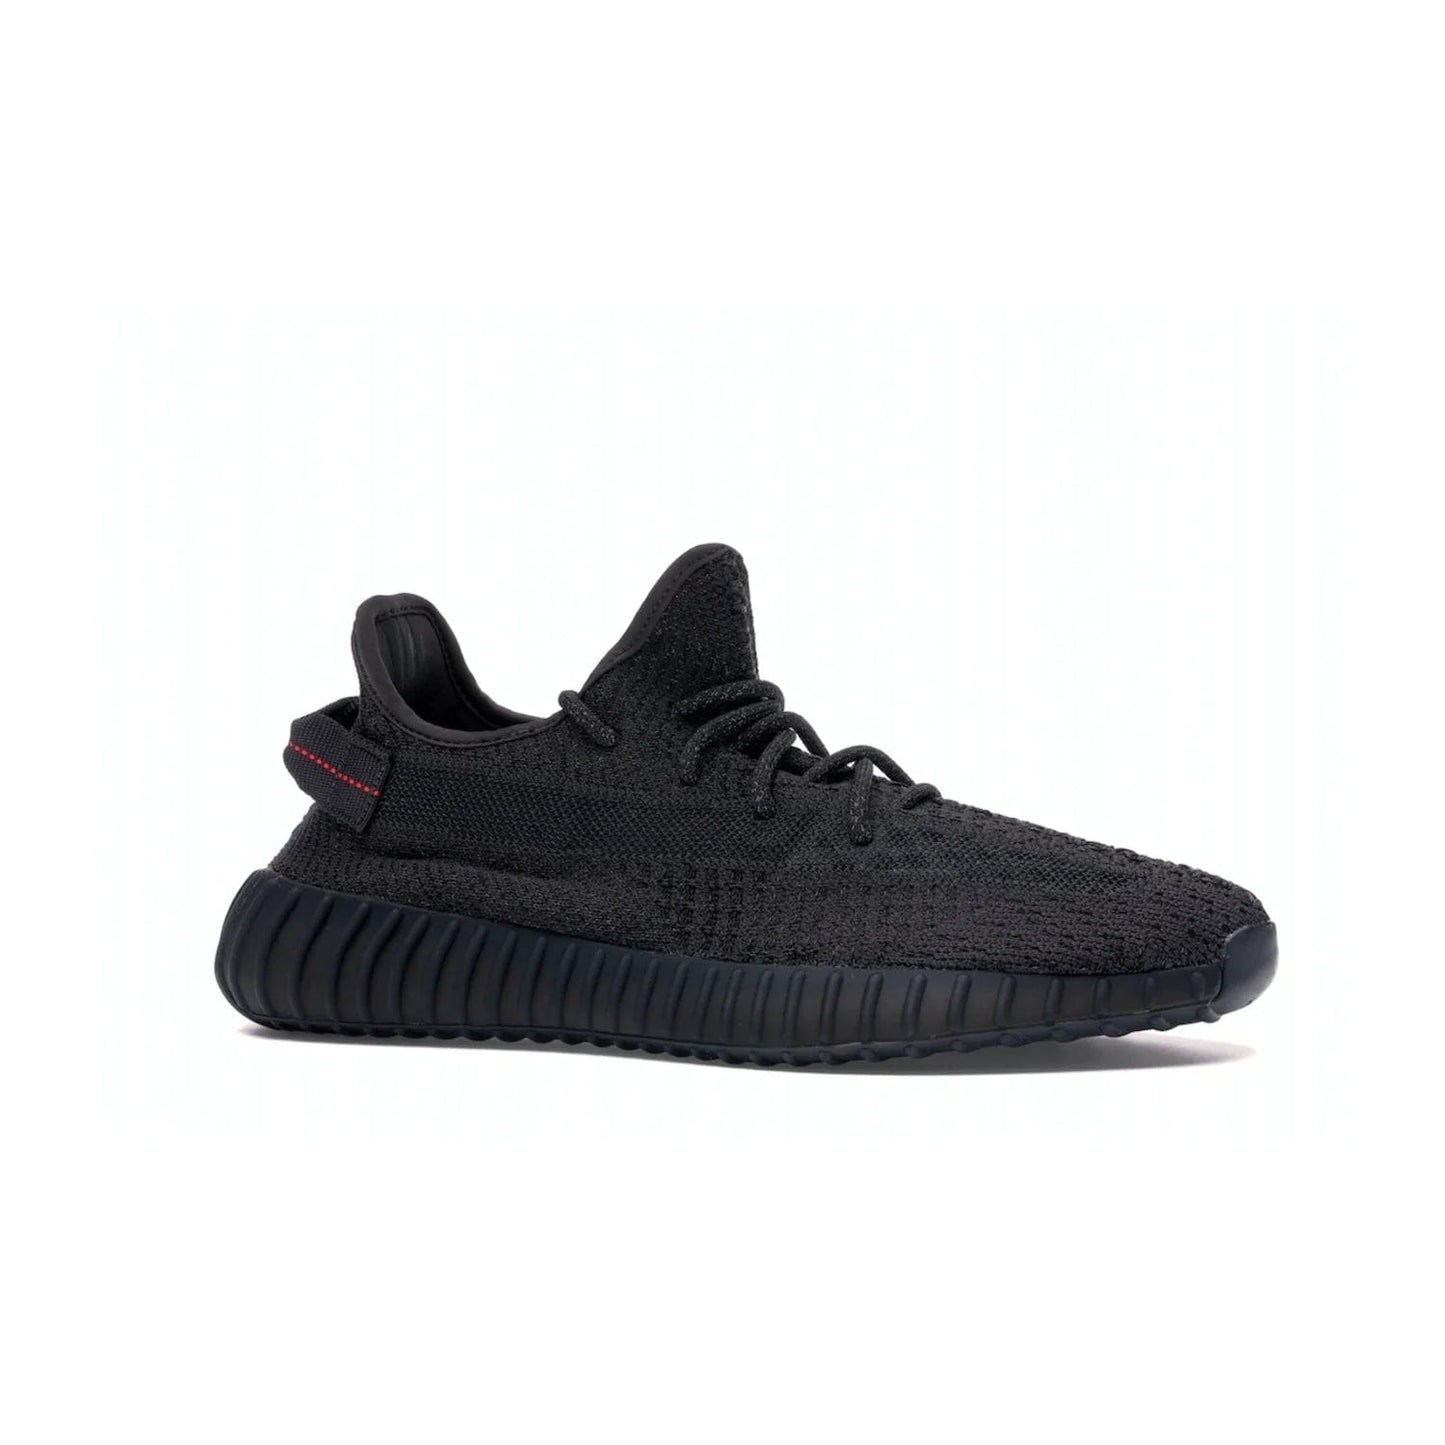 adidas Yeezy Boost 350 V2 Static Black (Reflective) - Image 3 - Only at www.BallersClubKickz.com - Make a statement with the adidas Yeezy Boost 350 V2 Static Black Reflective. All-black upper, reflective accents, midsole, and sole combine for a stylish look. High quality materials. June 2019 release. Add to your collection today.